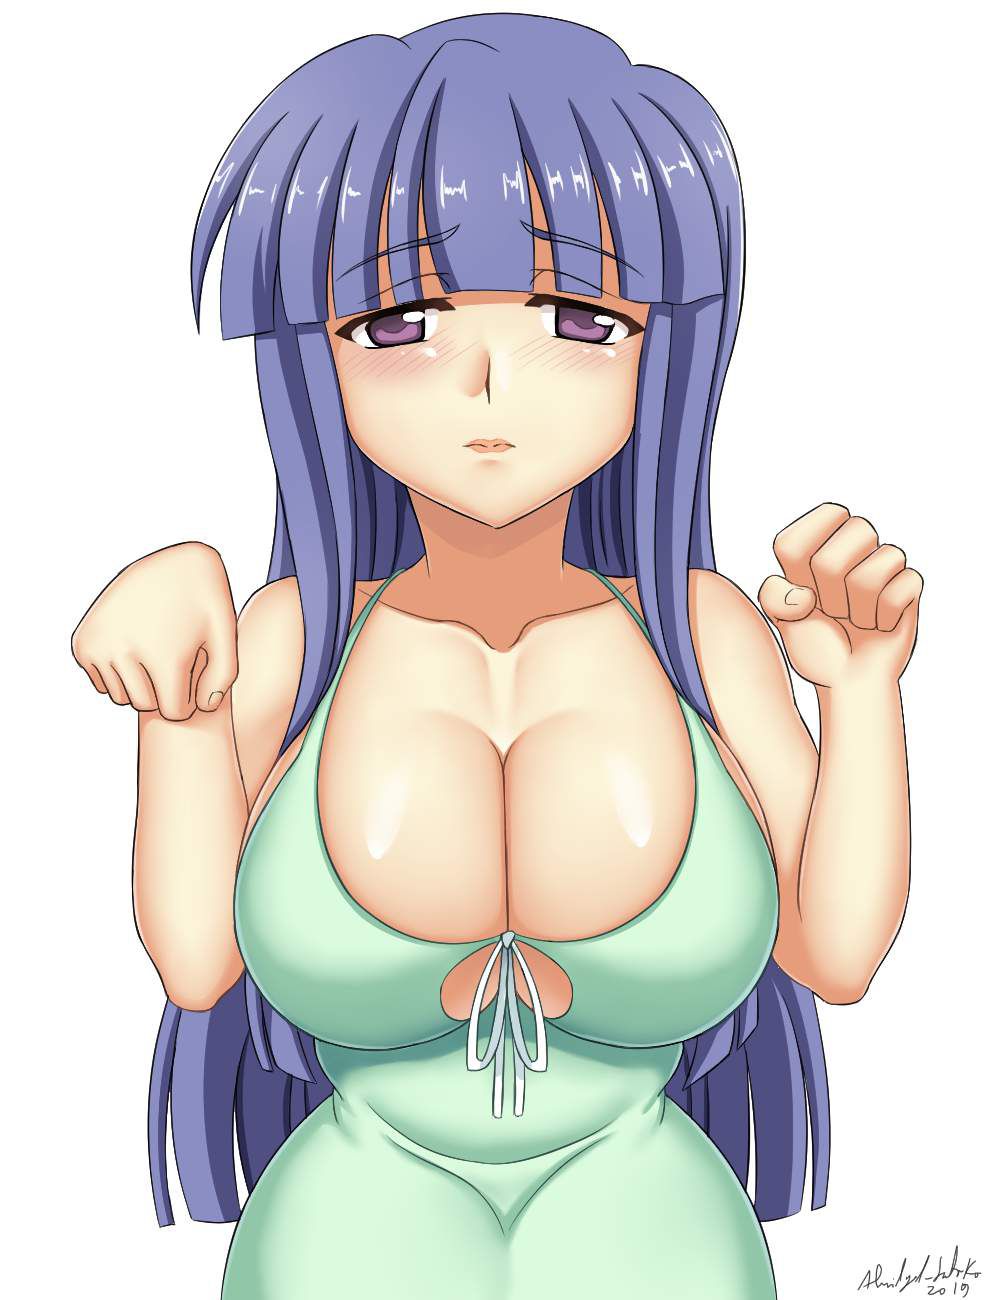 The image of higurashi that is too erotic is a foul! 8